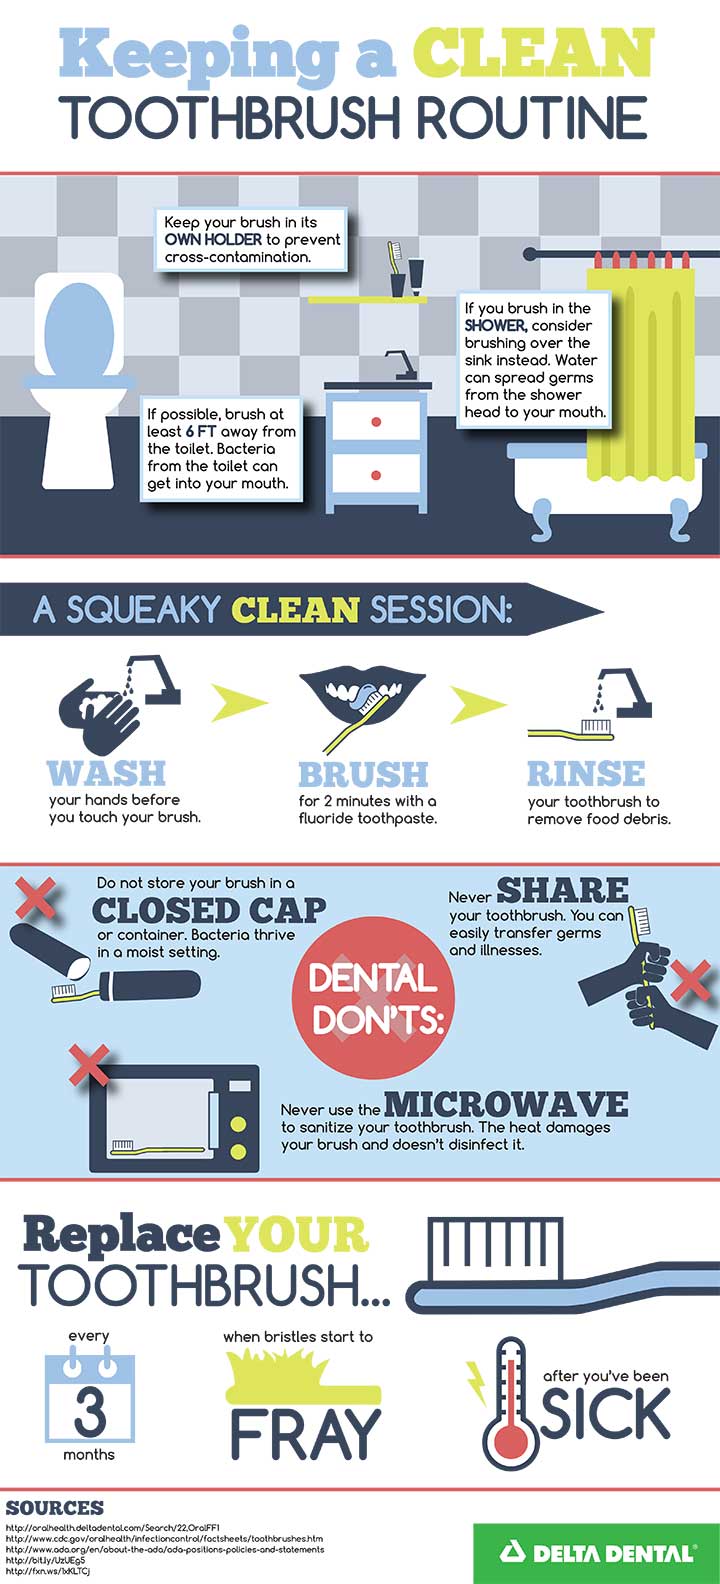 Keeping a Clean Toothbrush Routine infographic